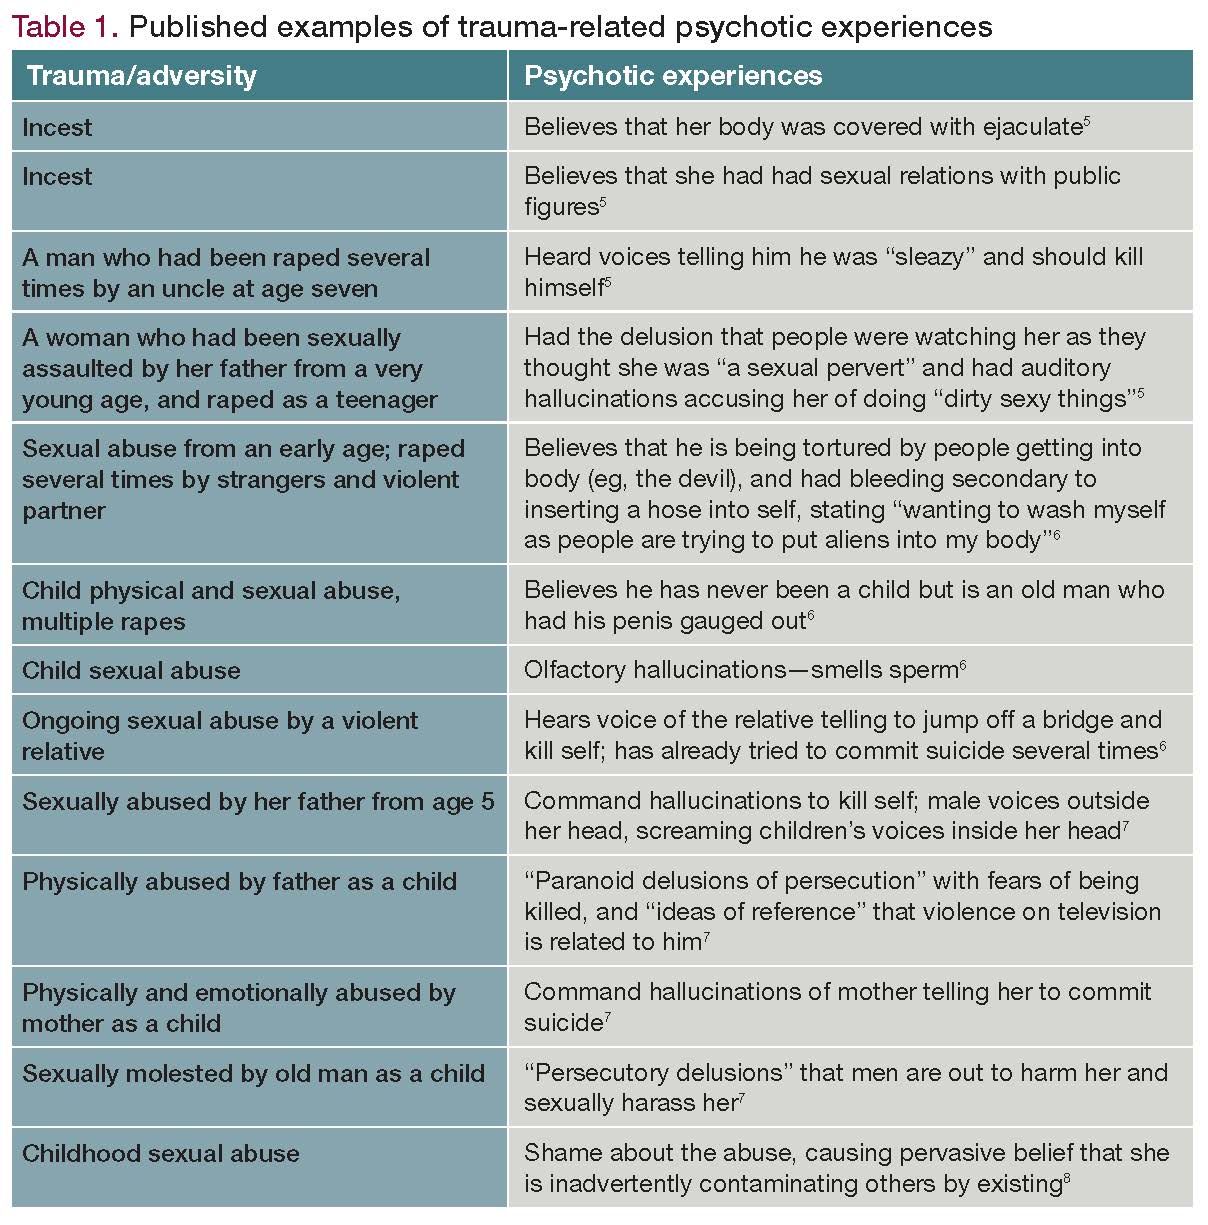 Table 1. Published examples of trauma-related psychotic experiences